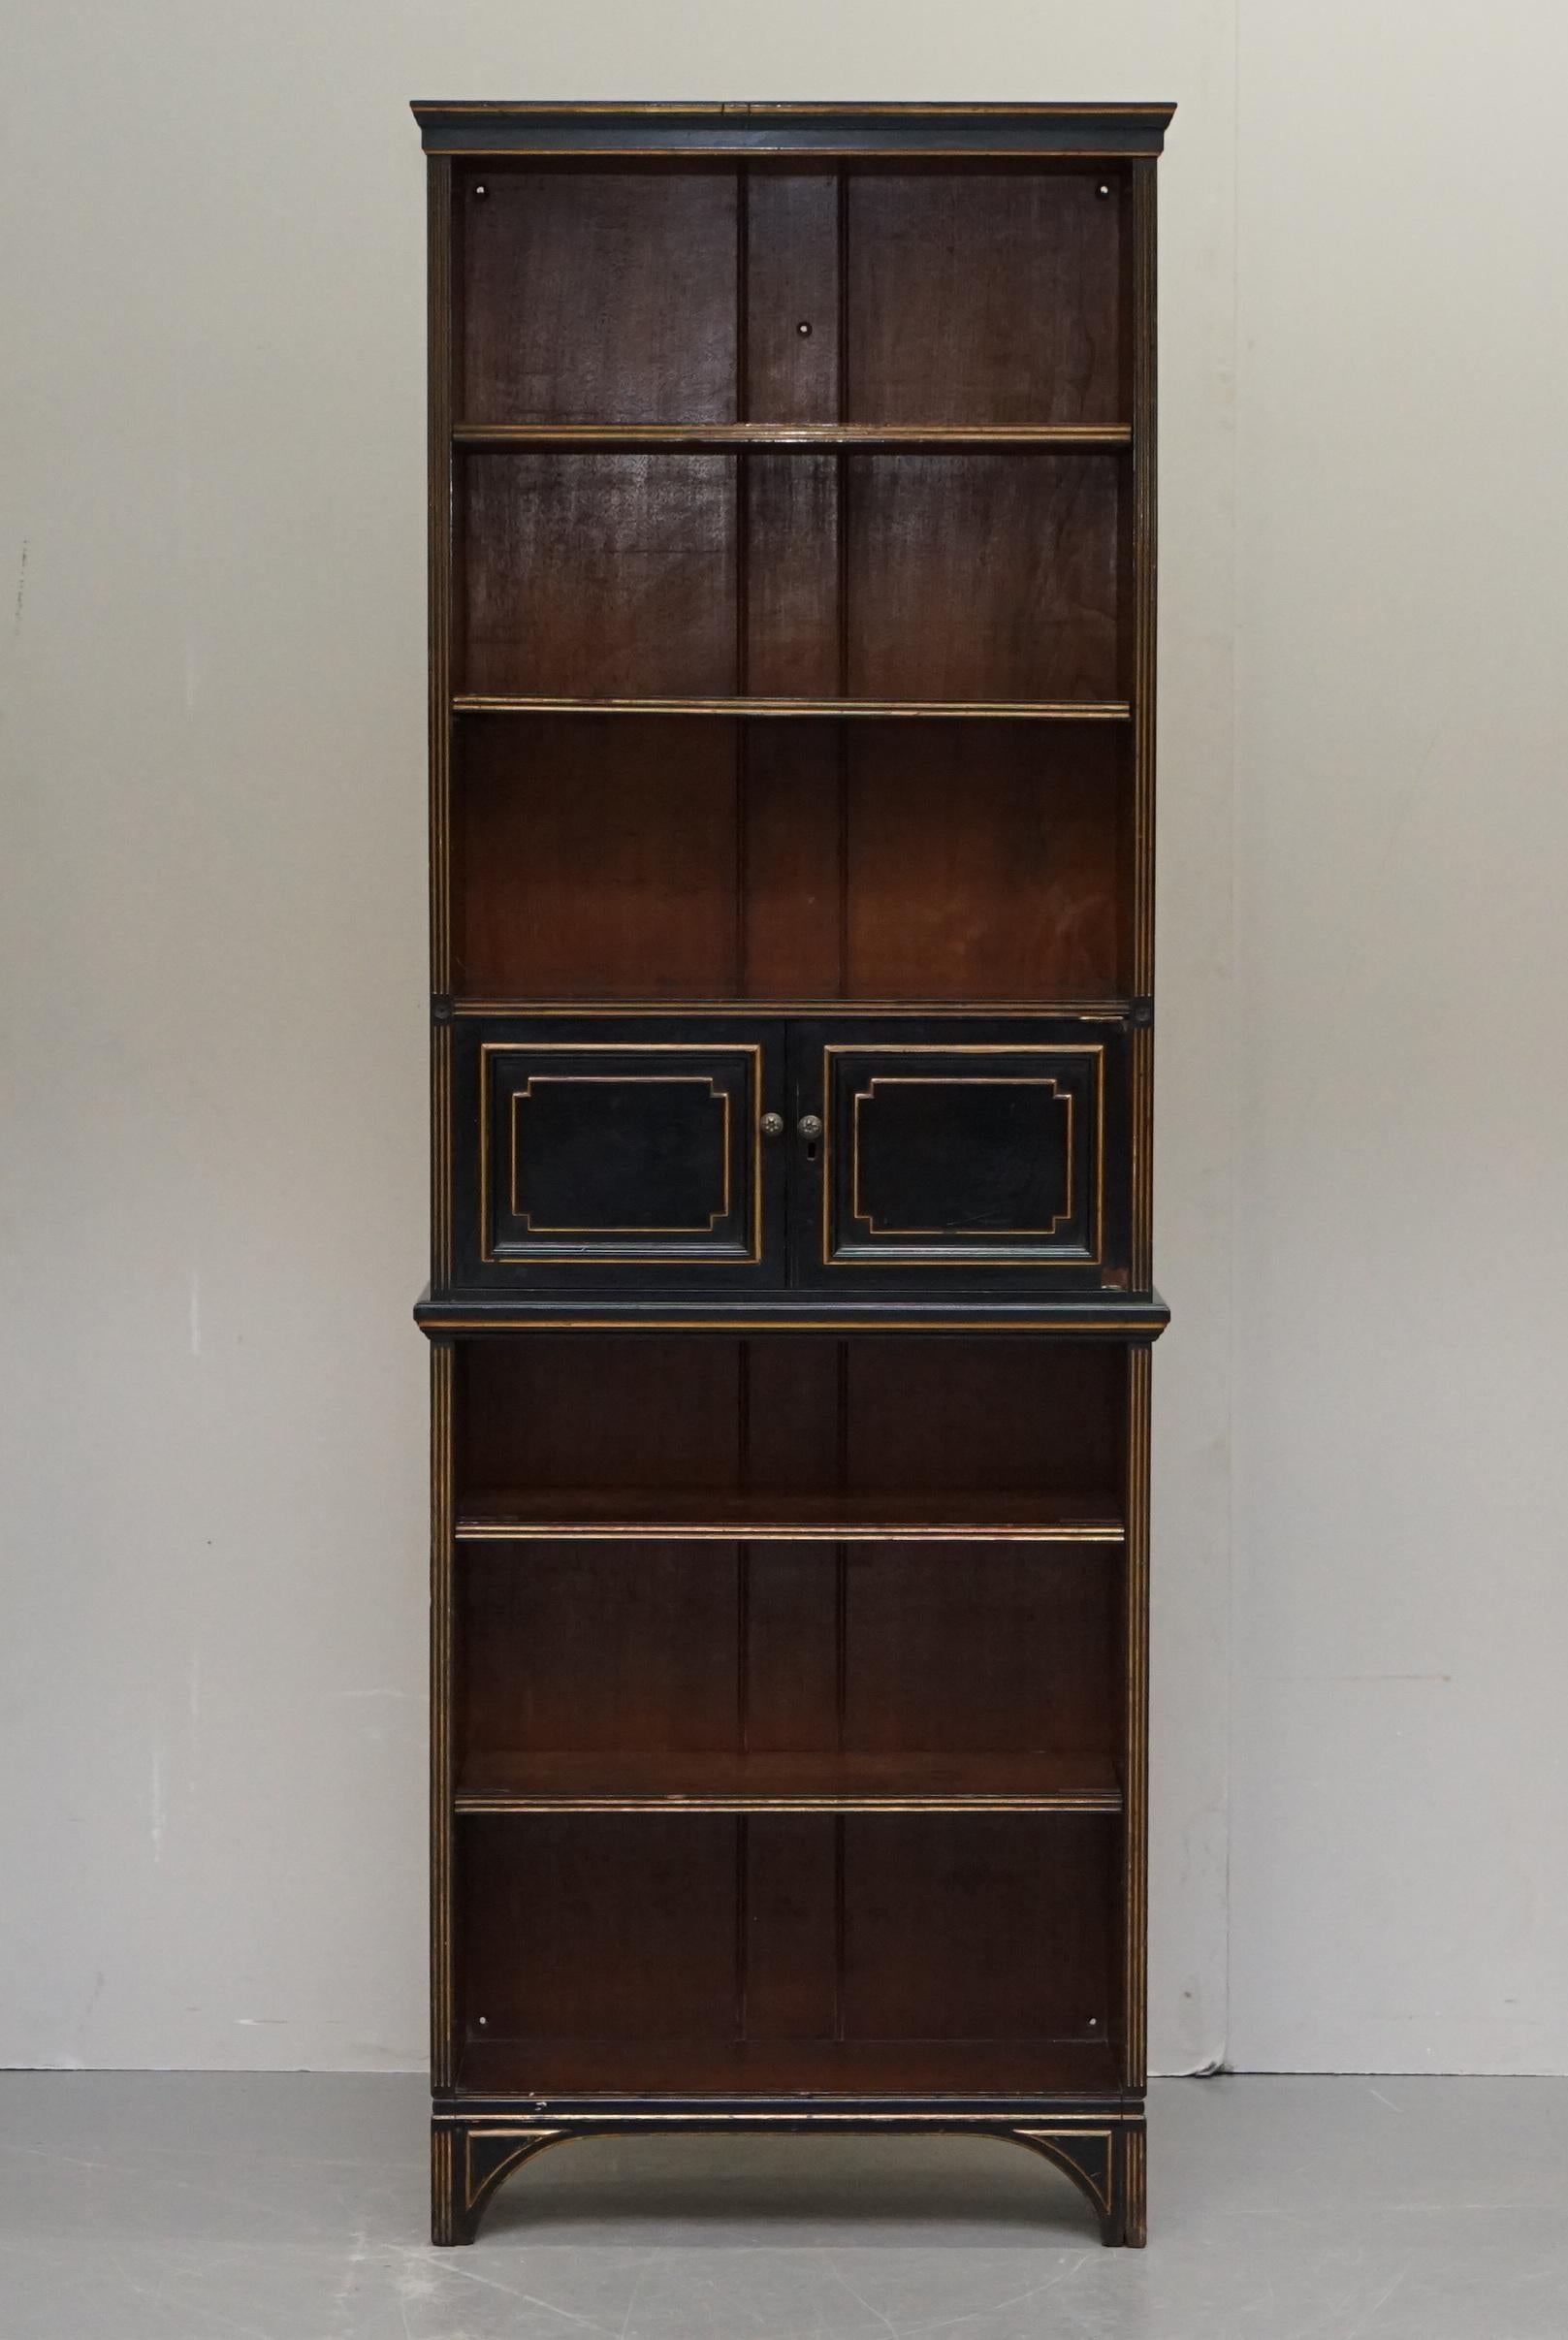 We are delighted to offer this stunning rare, fully stamped, original Victorian Holland and Son’s mahogany Aesthetic movement library bookcase

A very rare and luxury piece made by one of the two finest cabinet makers in British history. The